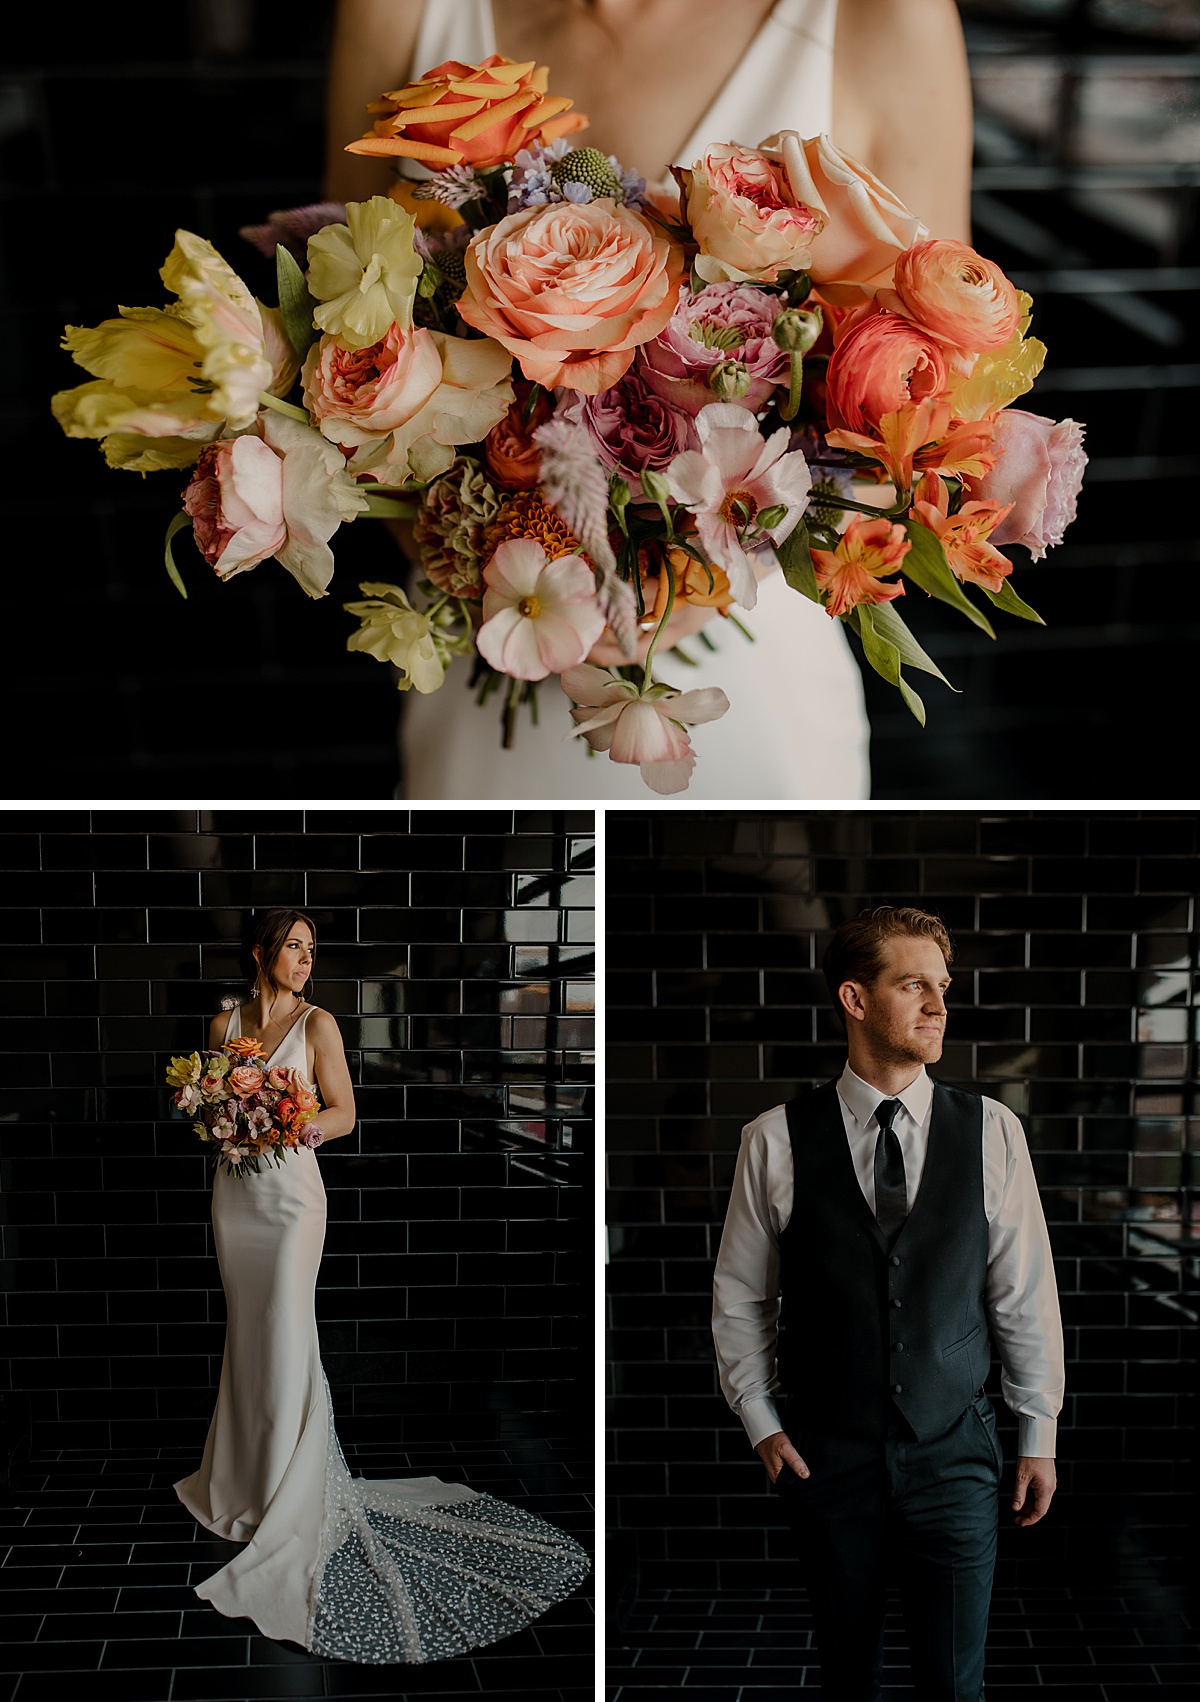 Colorful, artistic wedding bride and groom portraits against a glossy black tile backdrop.